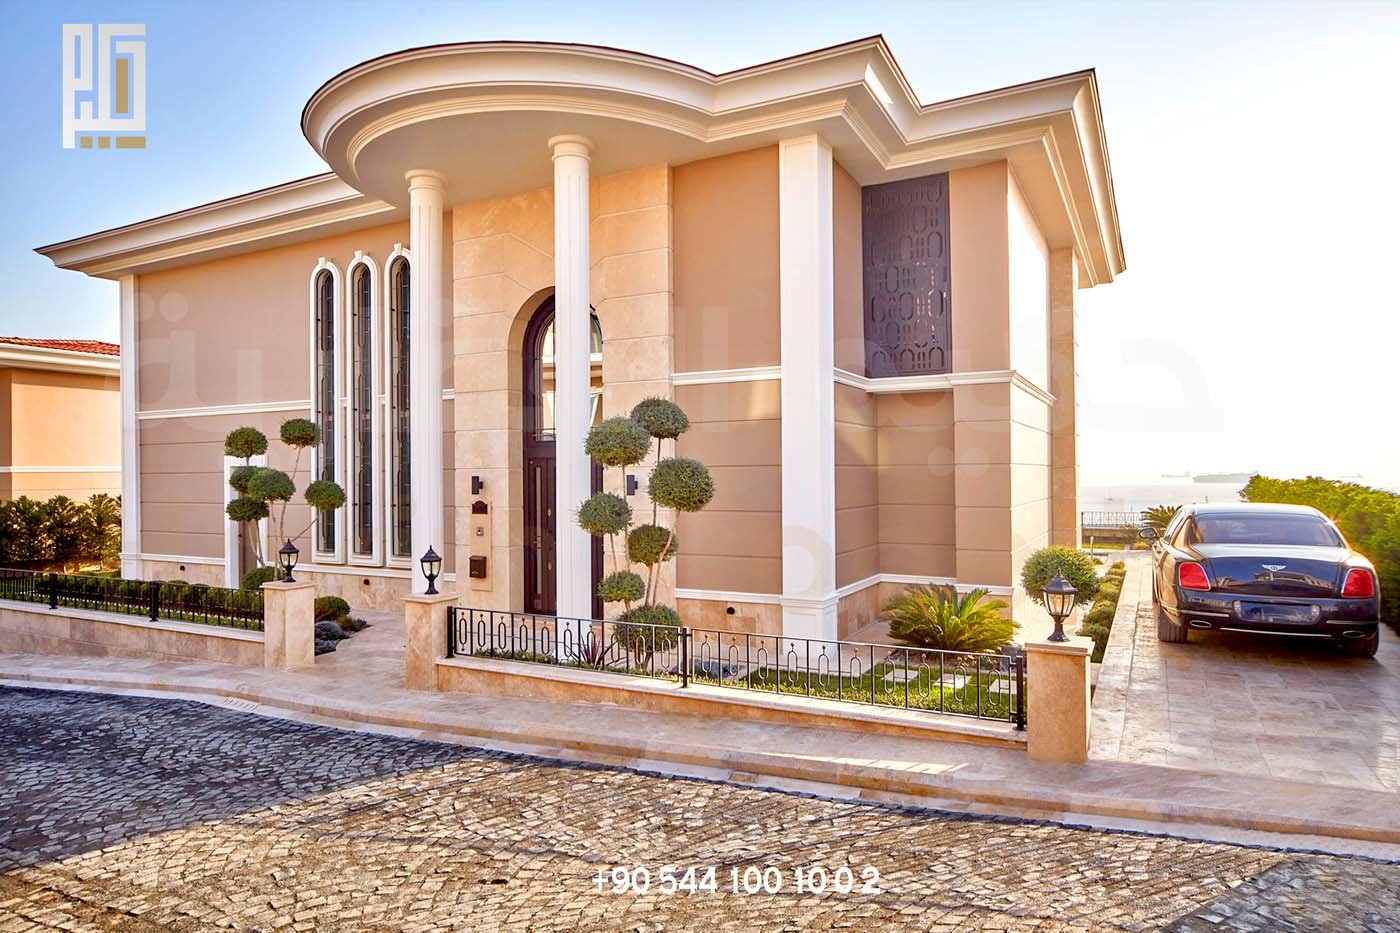 Villas for sale in Istanbul